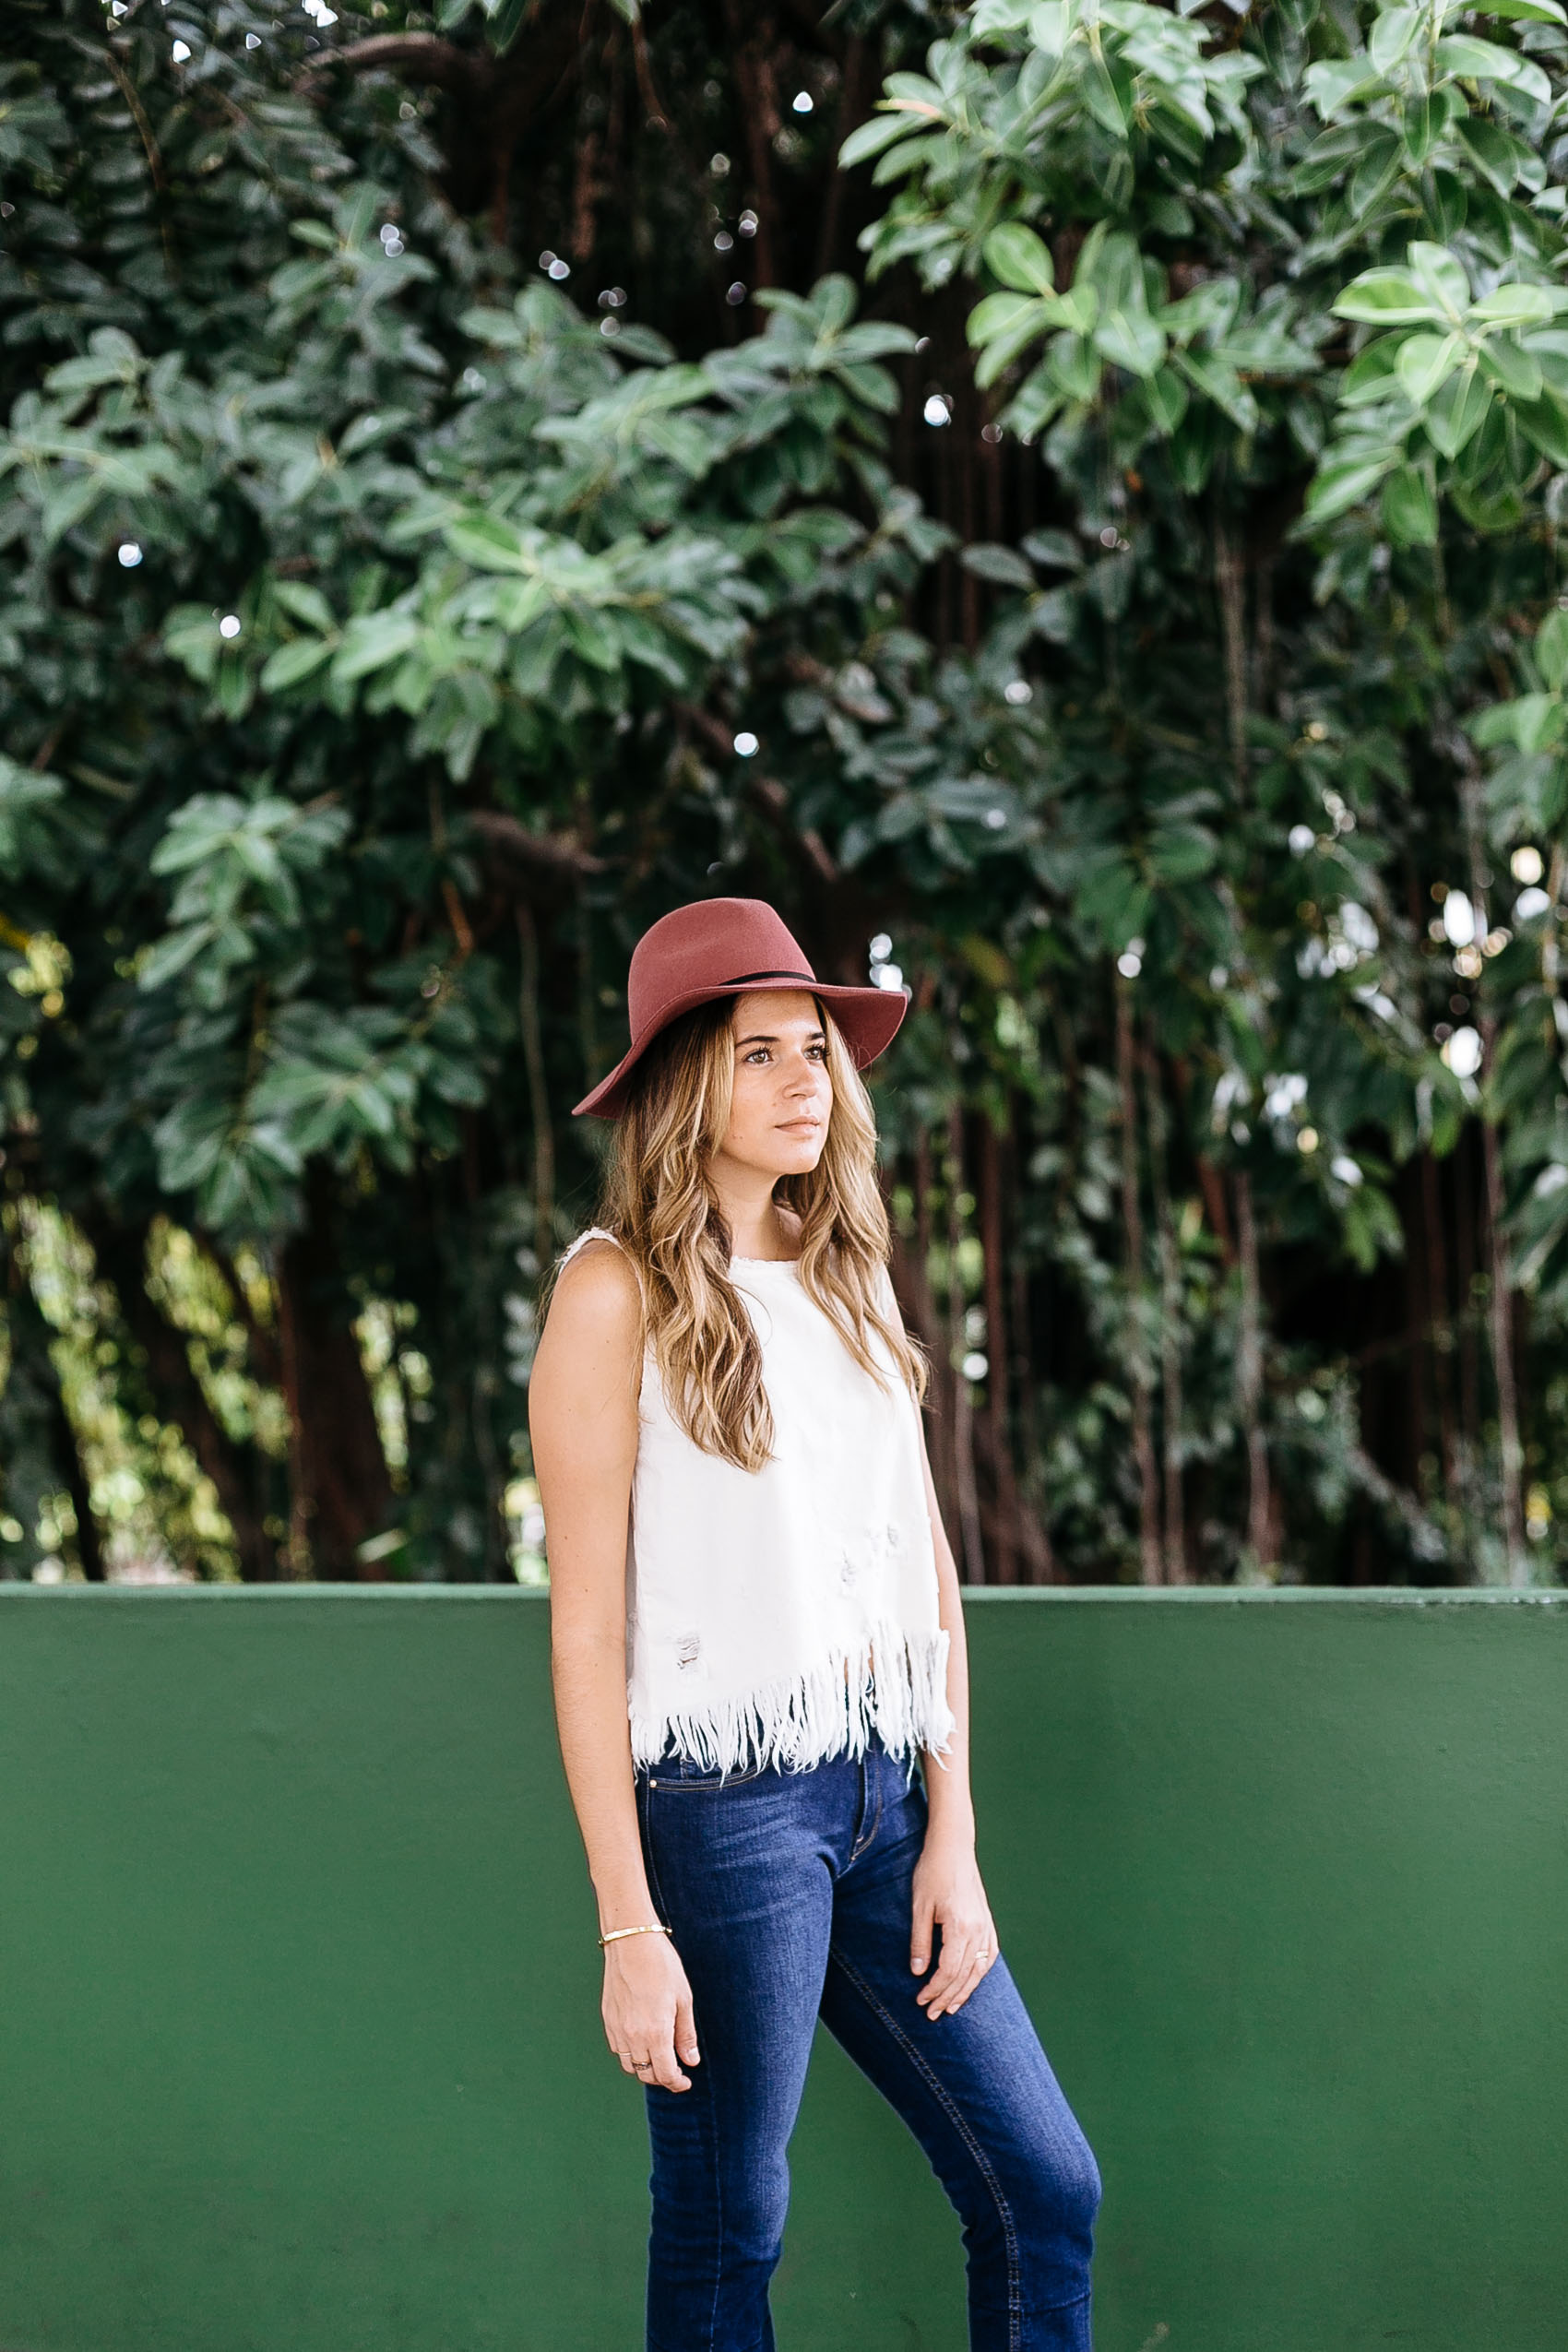 Maristella wears a fedora hat, boxy top and jeans for summer